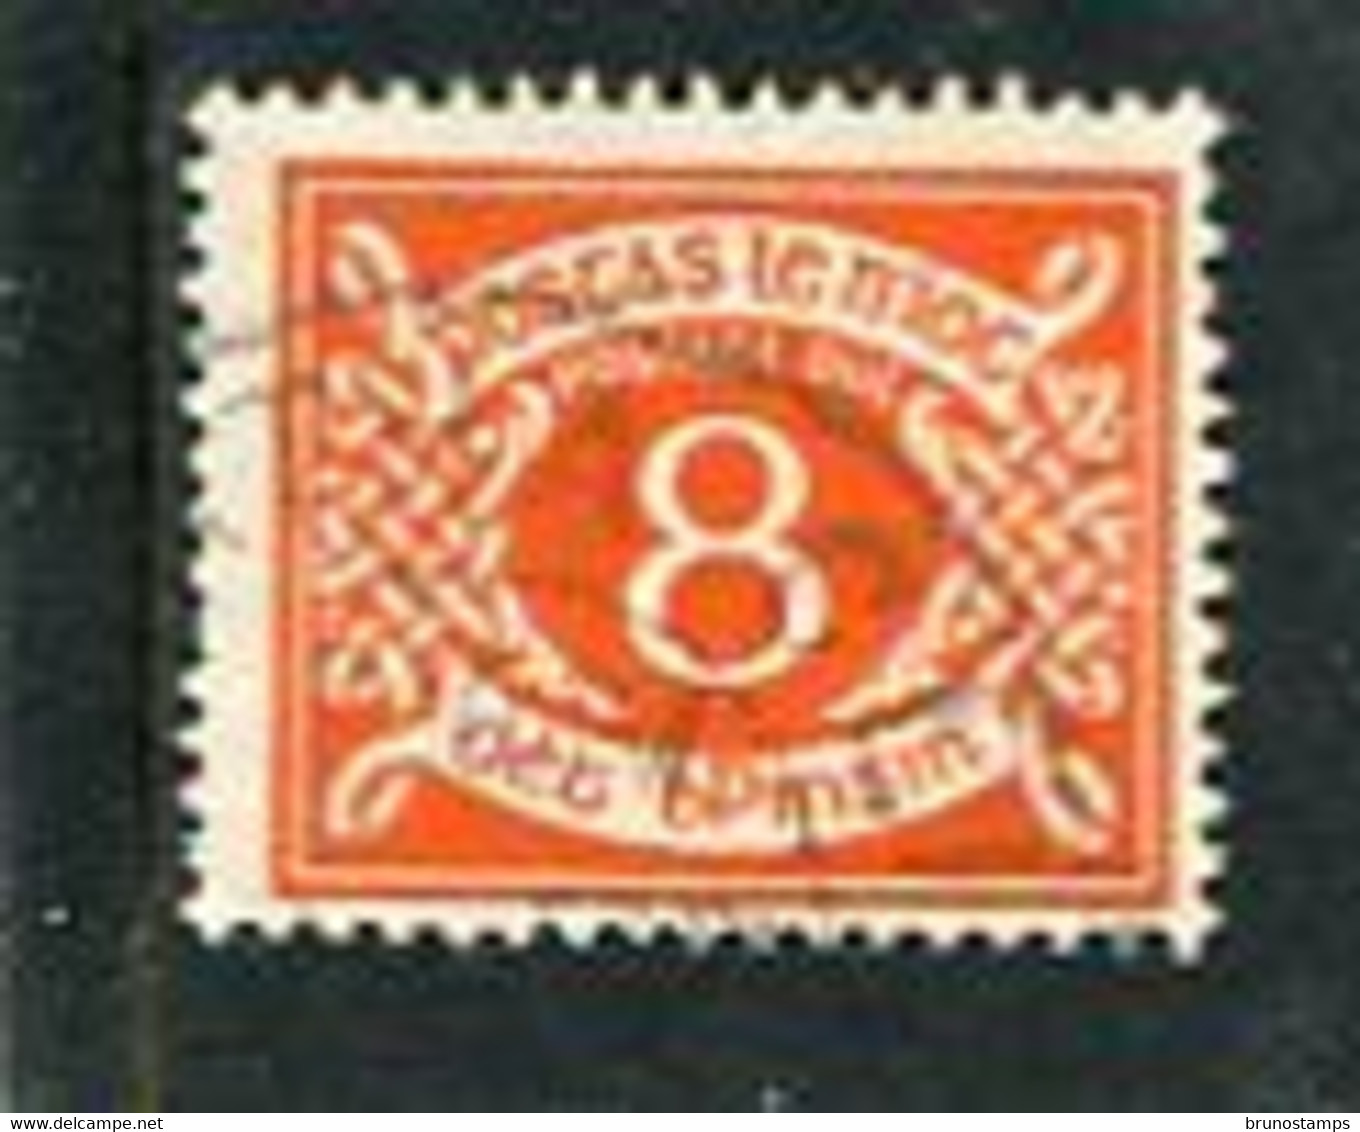 IRELAND/EIRE - 1962  POSTAGE DUE  8d  E WATERMARK  FINE USED - Postage Due